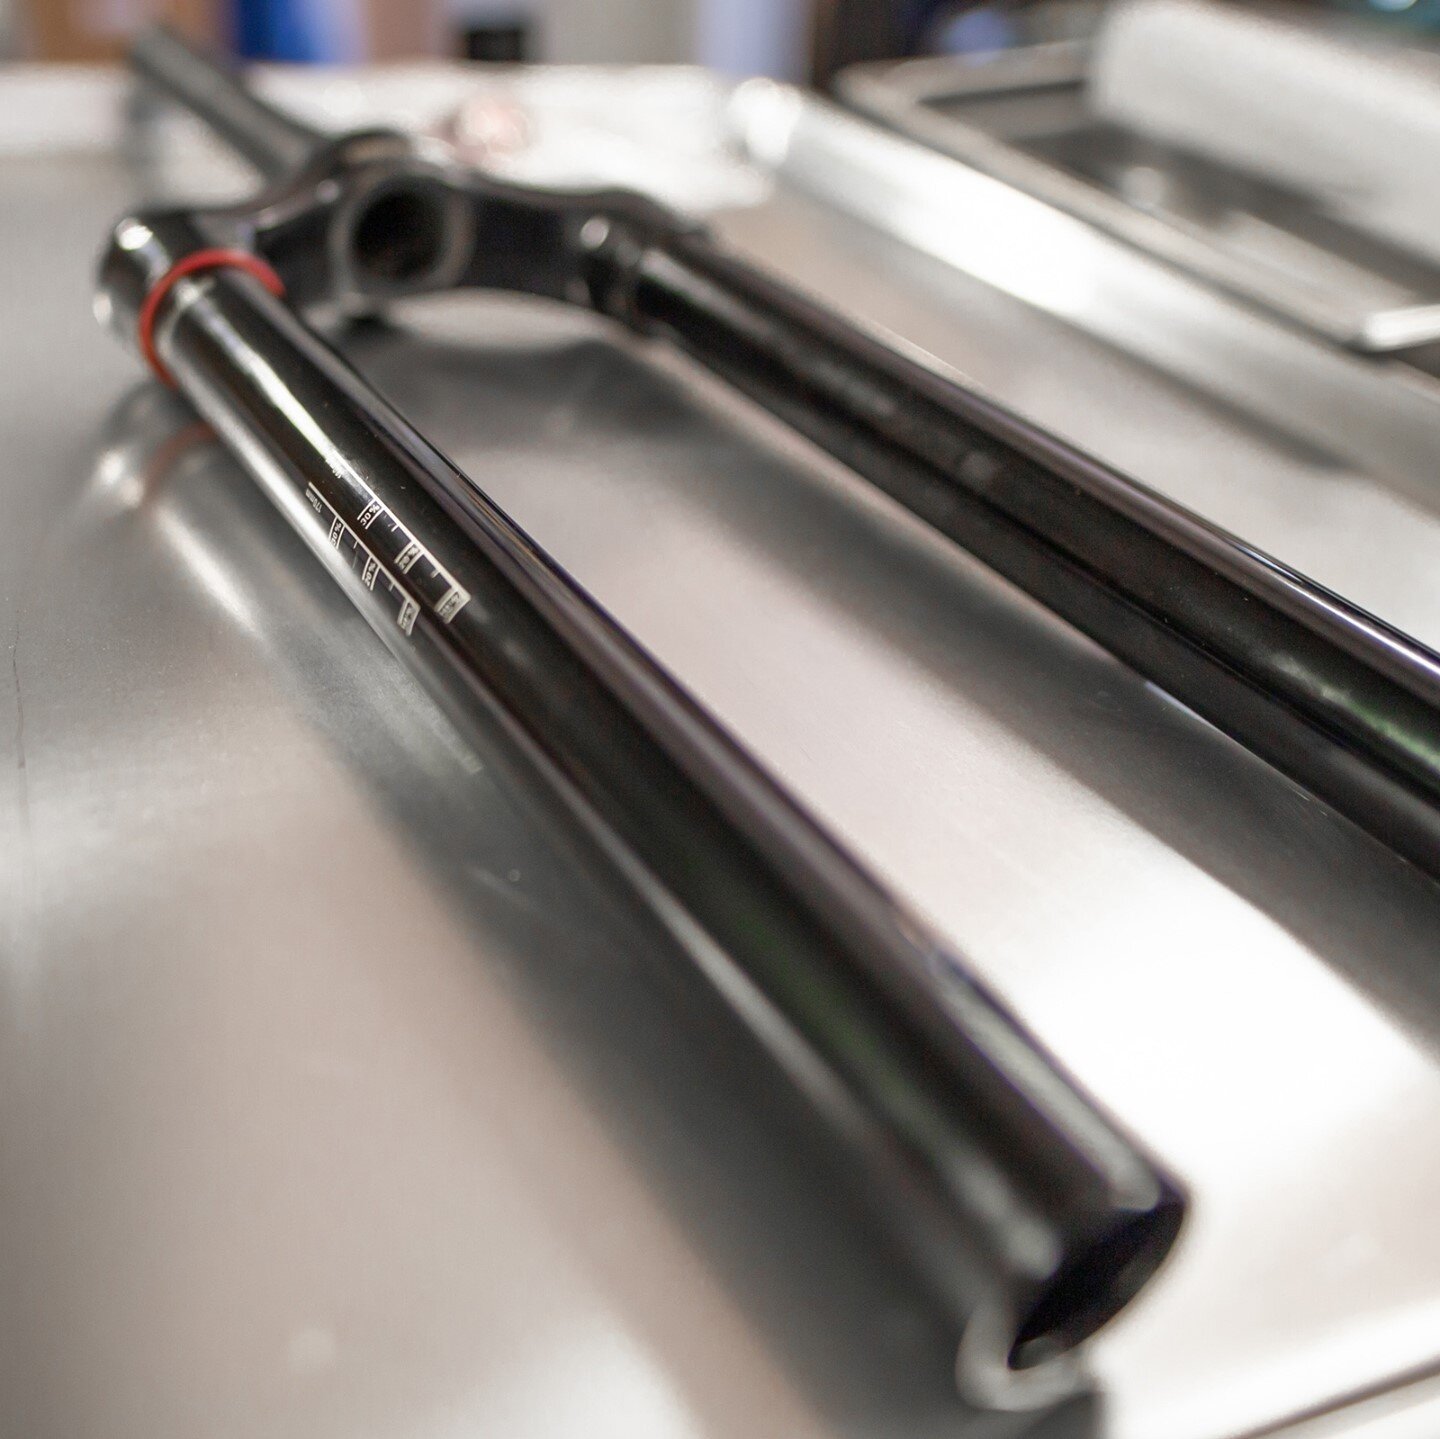 We&rsquo;ve partnered with @whistlersuspensionworks to offer a solution for those pesky CSU creaks.⁠
⁠
Steerer tube and stanchions are pressed out from your crown steerer unit, treated and reinstalled with a stronger bond than before. If your fork is